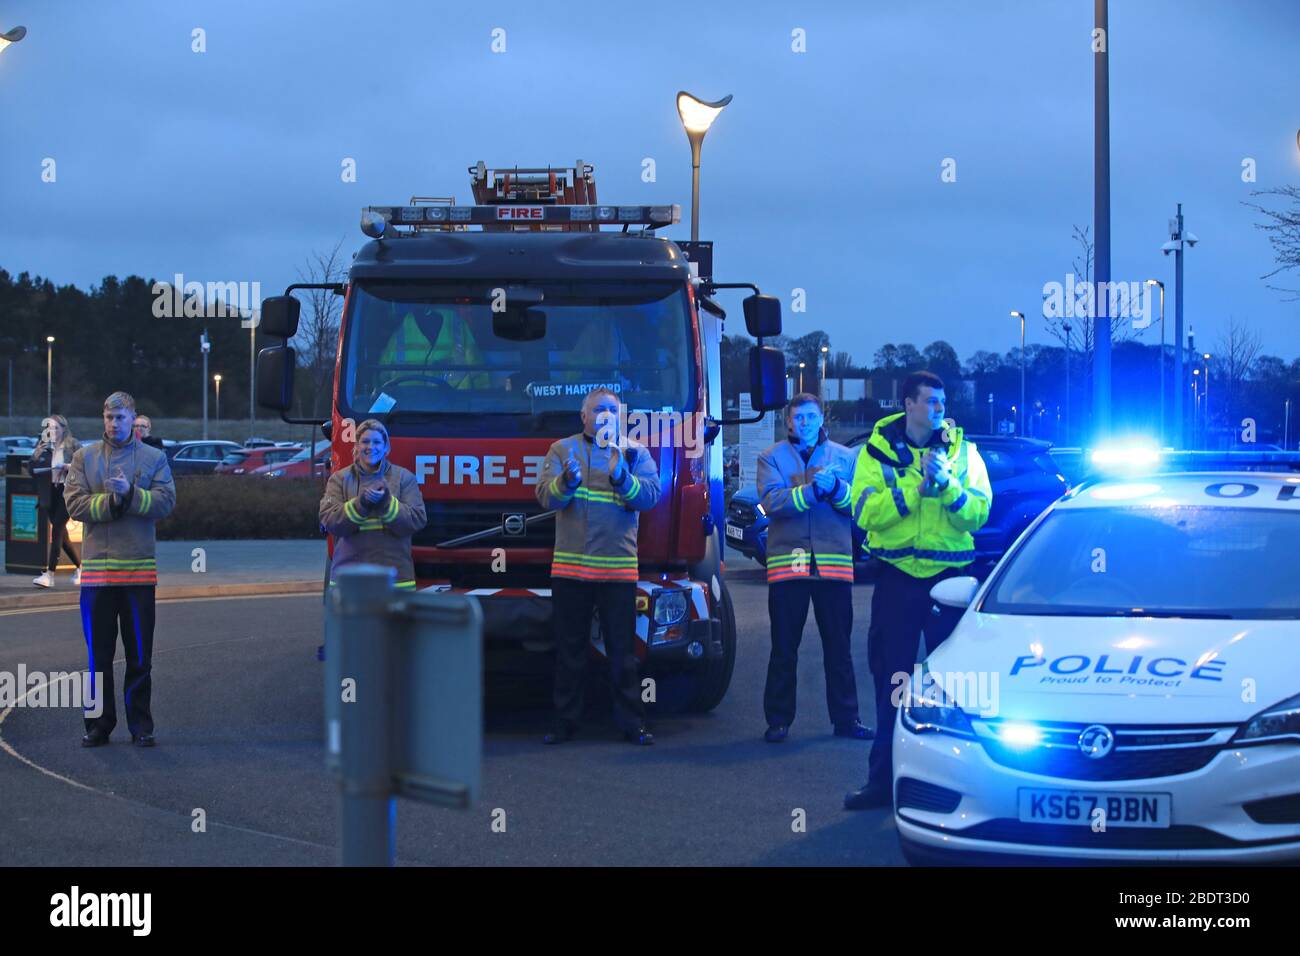 Members of the Northumberland Fire and Rescue Service applauding outside Crammington Hospital in Northumberland, saluting local heroes during Thursday's nationwide Clap for Carers NHS initiative to applaud NHS workers fighting the coronavirus pandemic. Stock Photo